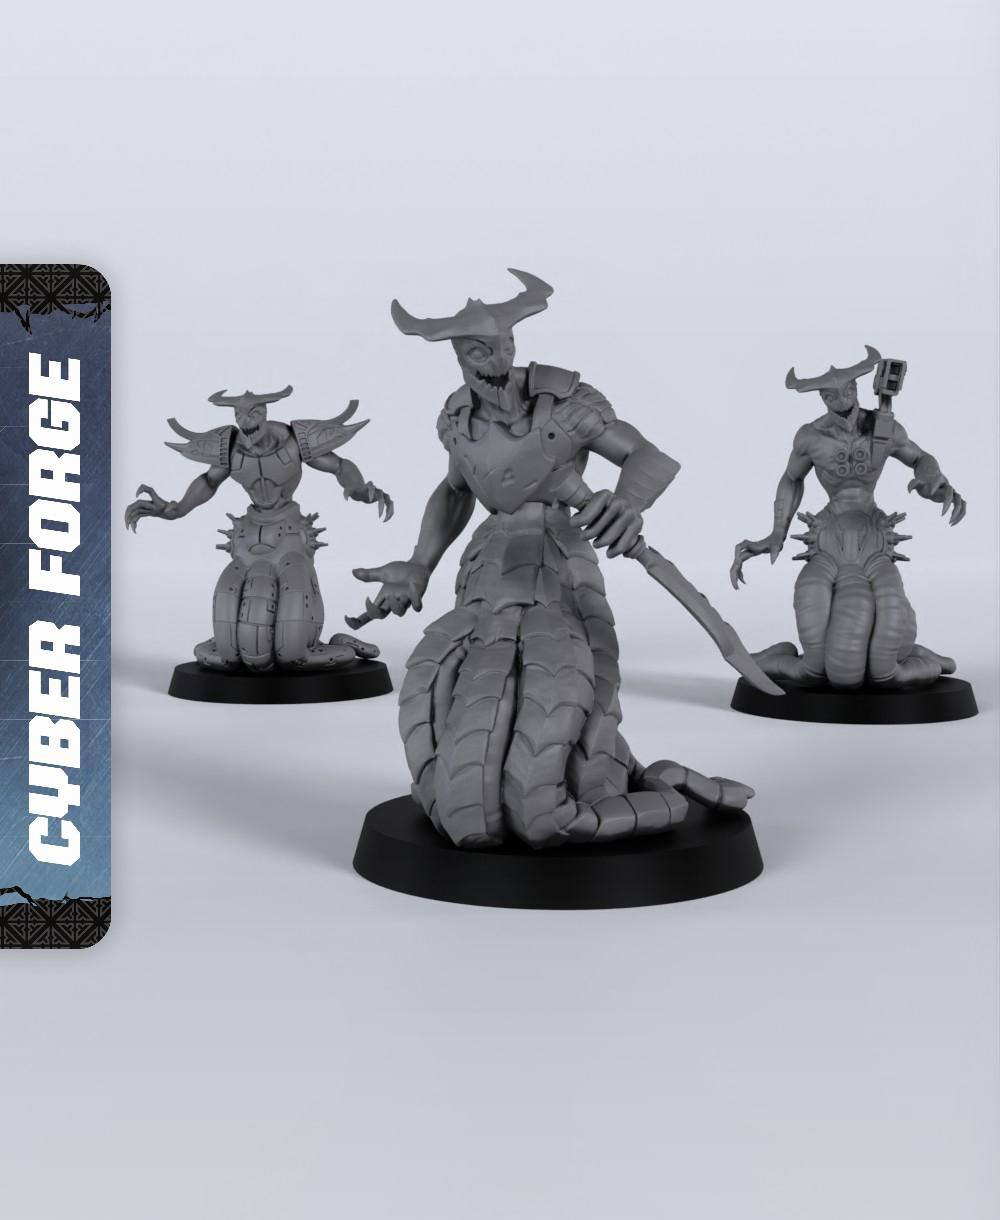 Torment Reavers - With Free Cyberpunk Warhammer - 40k Sci-Fi Gift Ideas for RPG and Wargamers 3d model